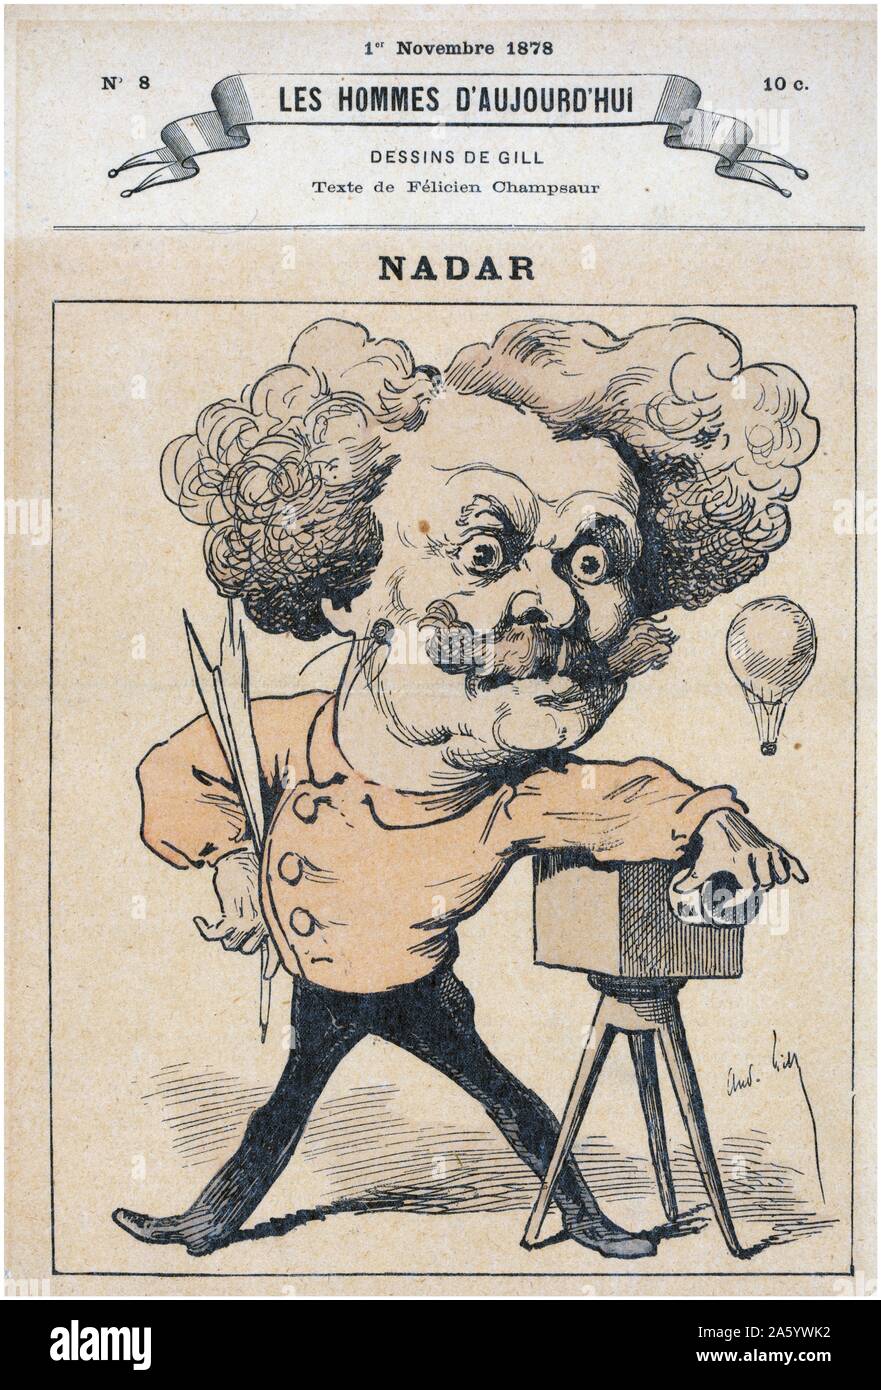 French caricature of photographer and balloonist Nadar, standing next to his camera and holding a quill pen in right hand. A balloon hovers in the background. By Andre Gill, 1840-1885, artist 1878 Stock Photo